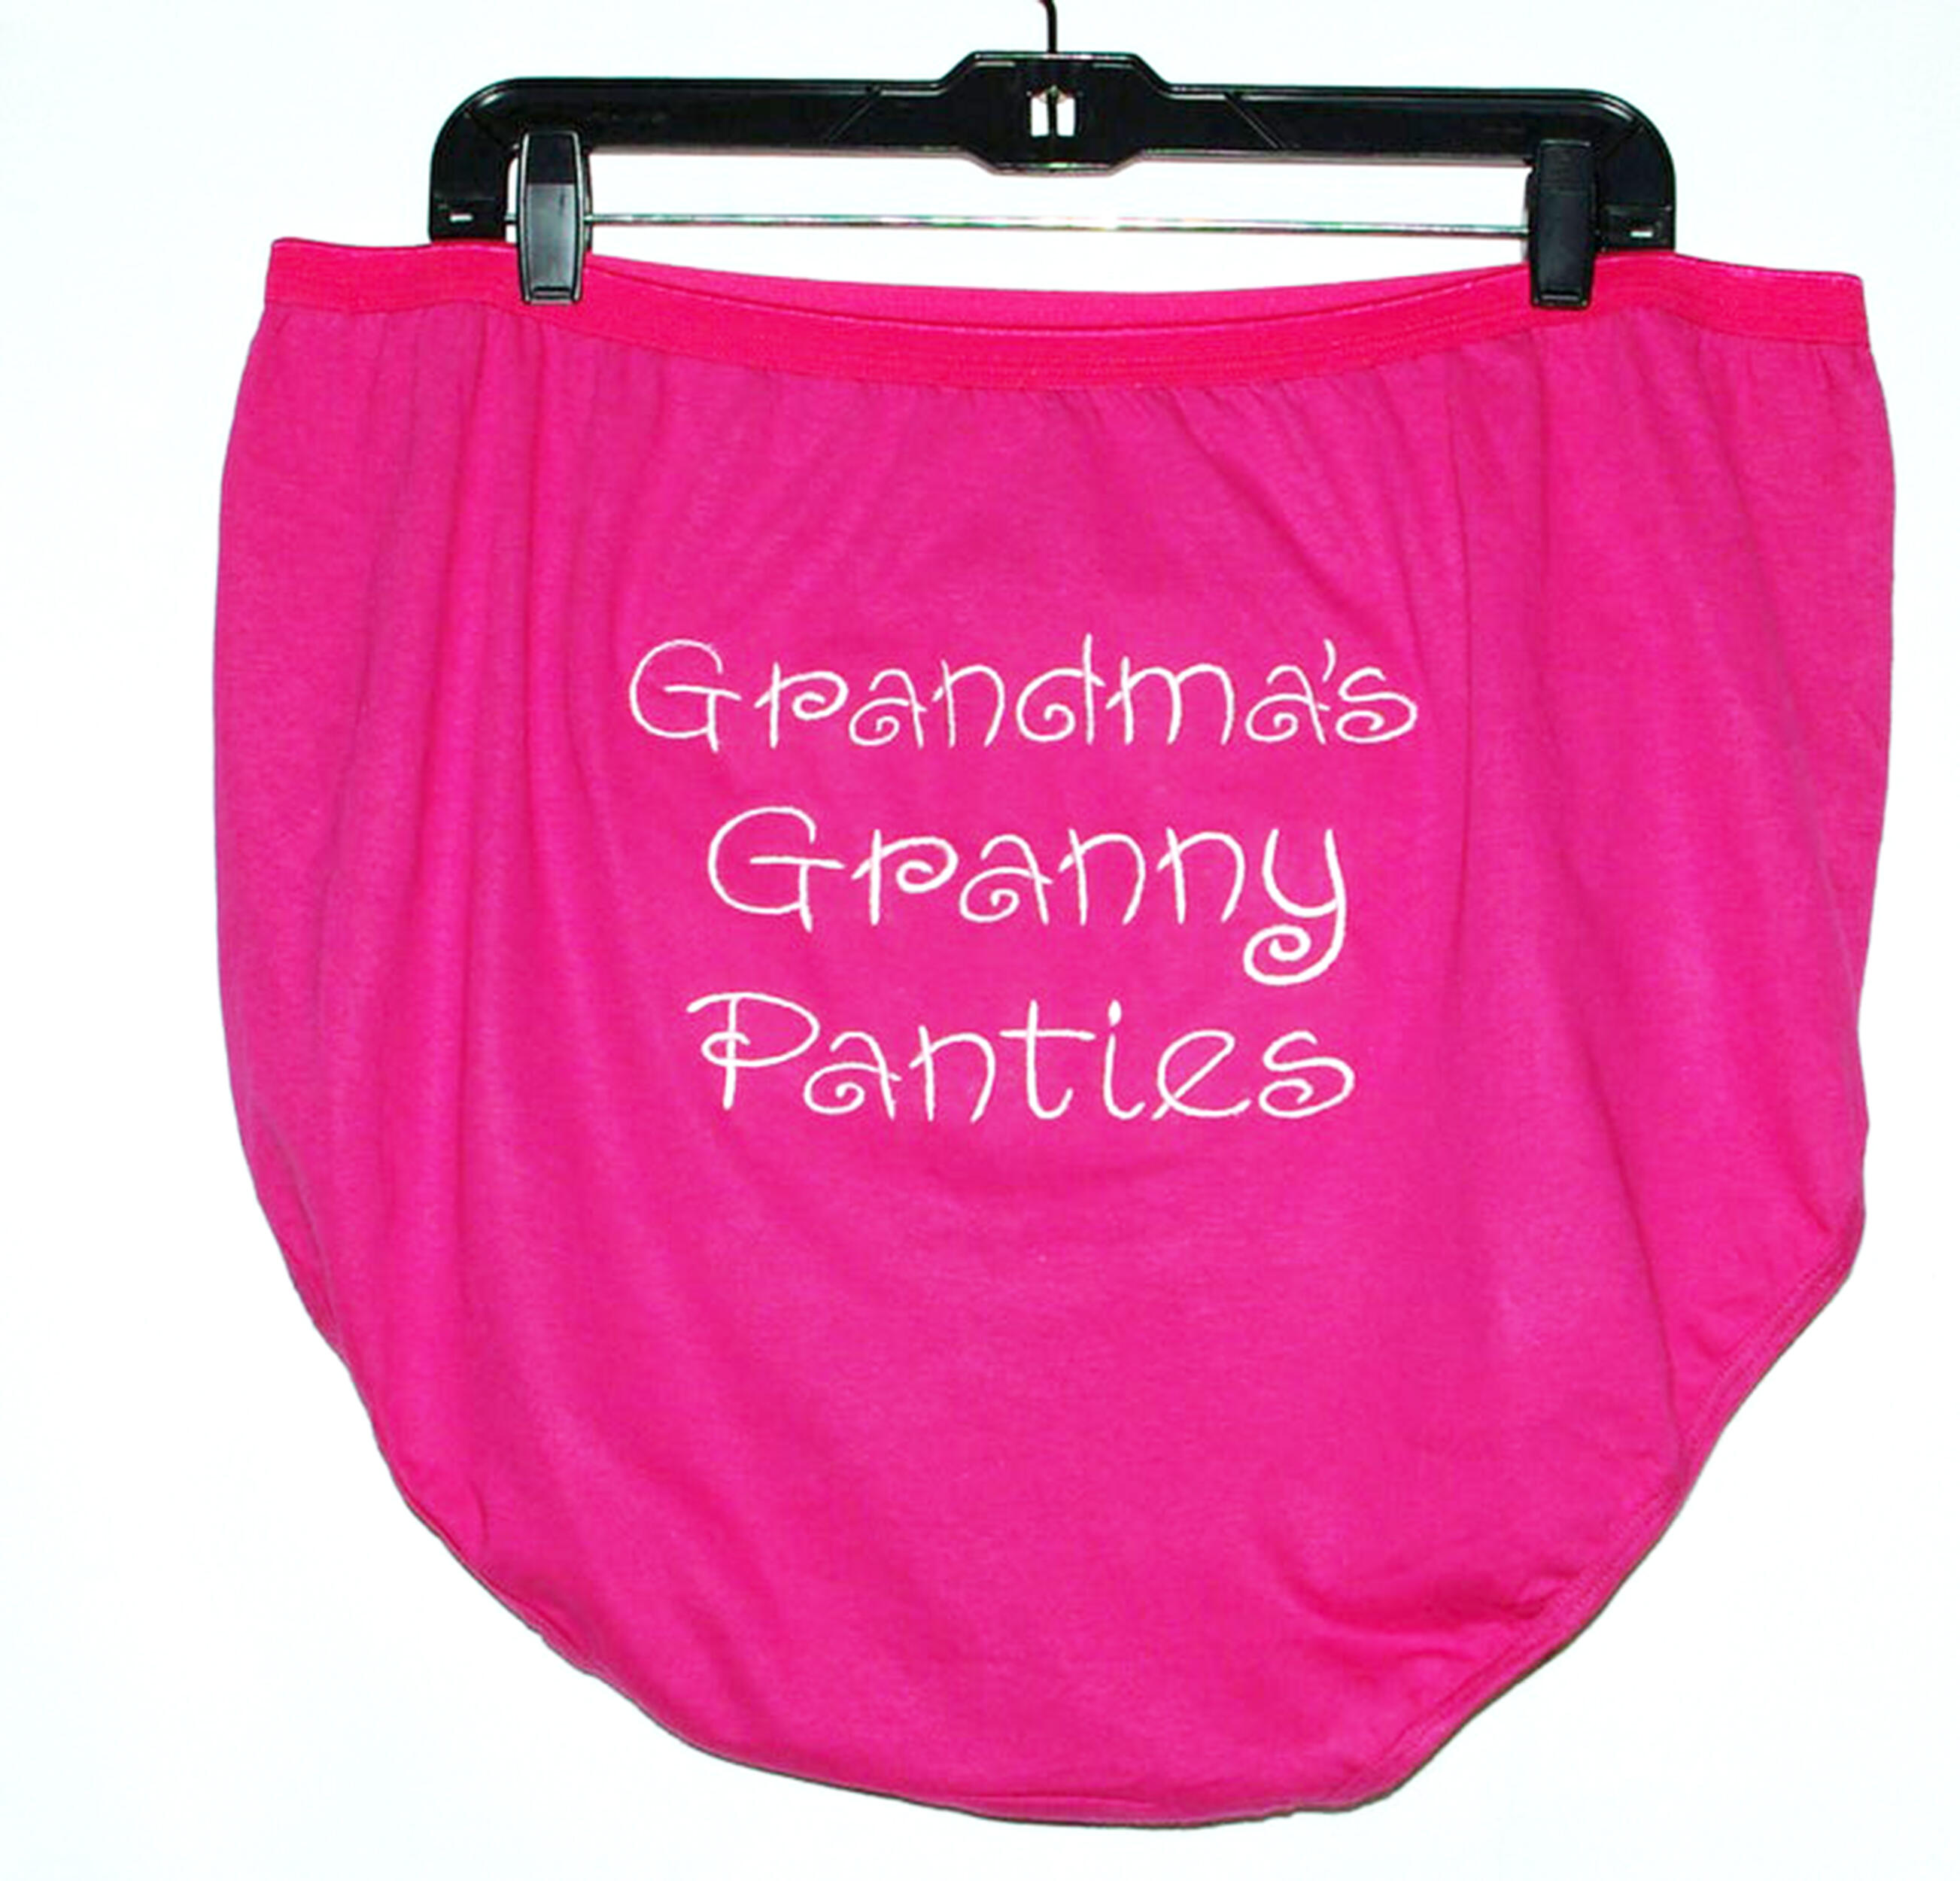 Granny Panties, Funny Custom Personalized Gag Gift Exchange, With Any Name,  Extra Large Size, Grandma, Mom, Sister, Ships TODAY, AGFT 742